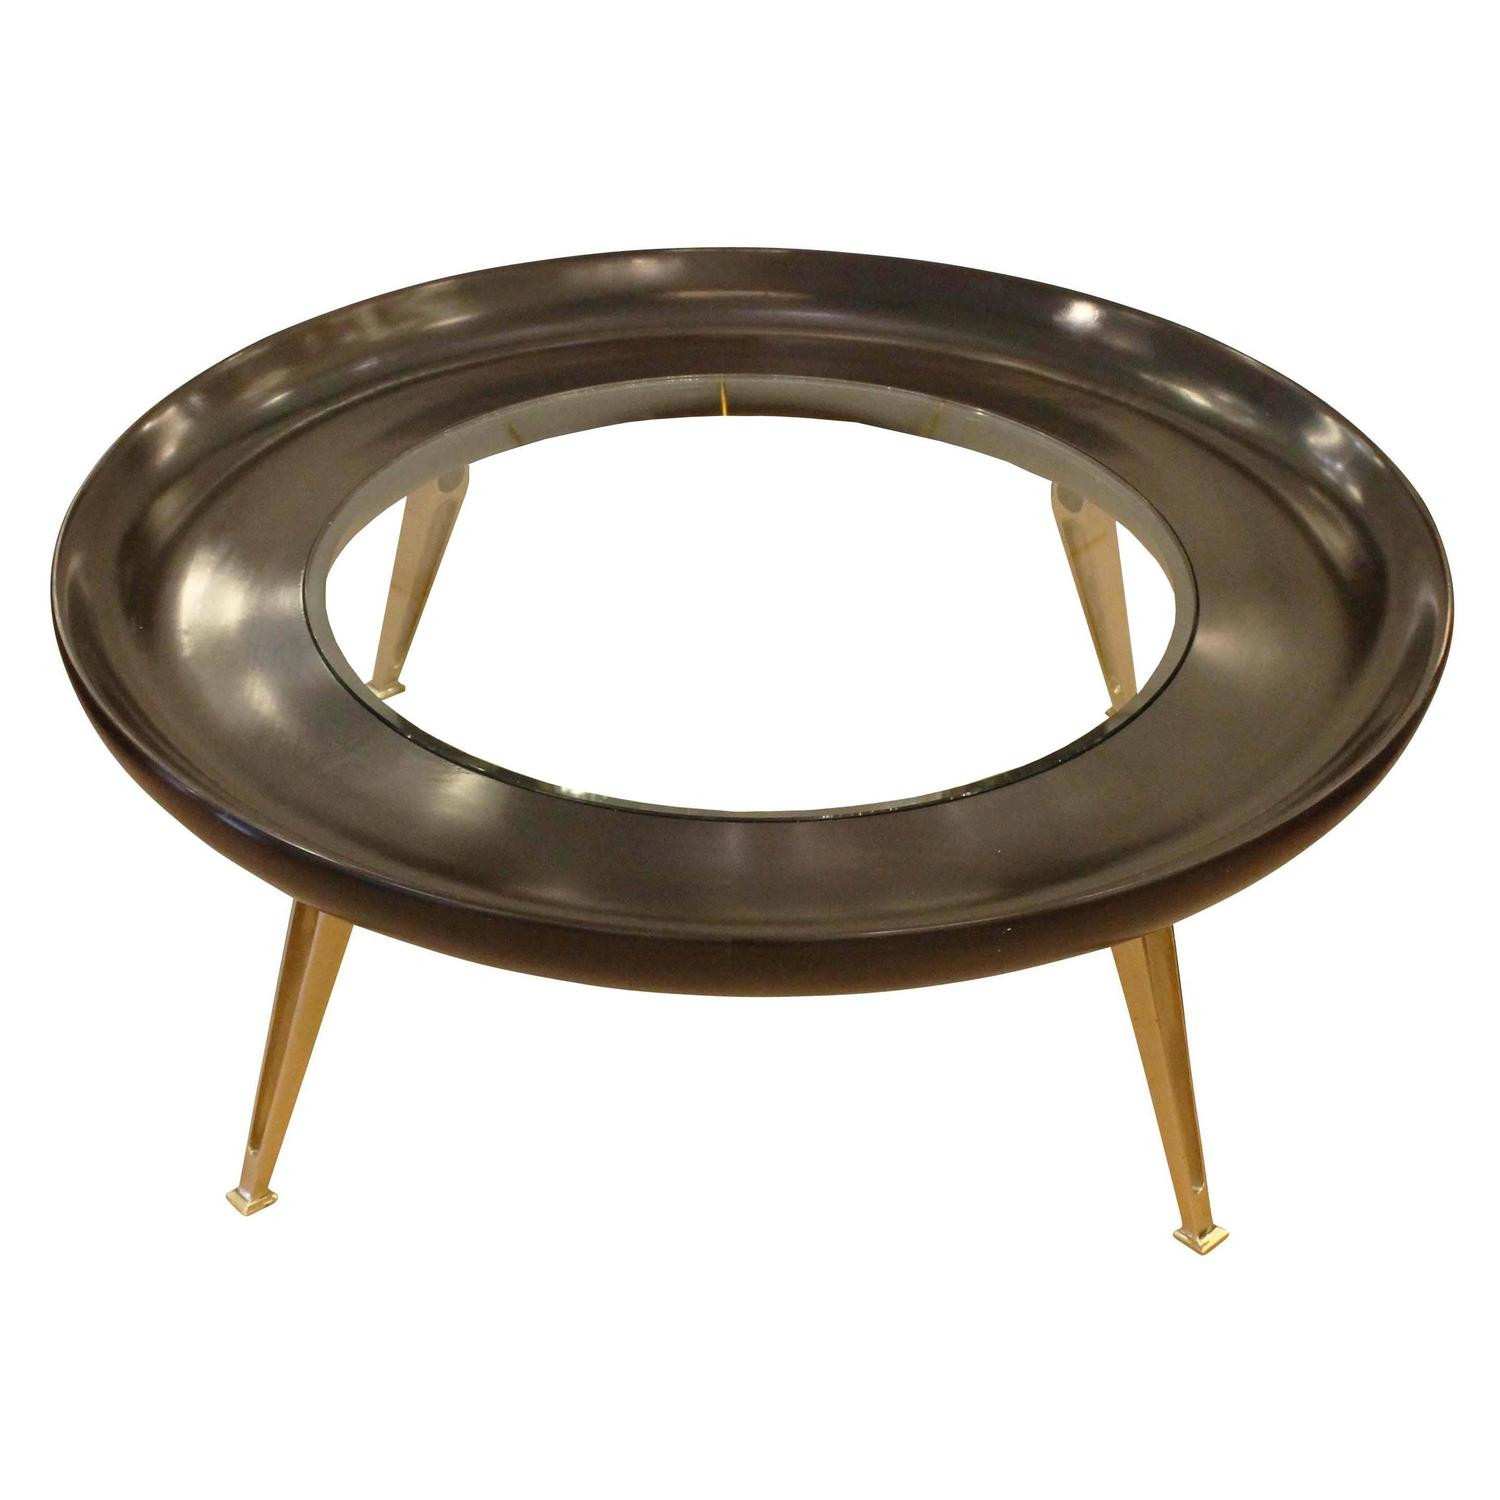 elegant round brass coffee table for copper creative and wood knurl nesting accent tables patio chairs with umbrella target threshold side occasional small console storage elm